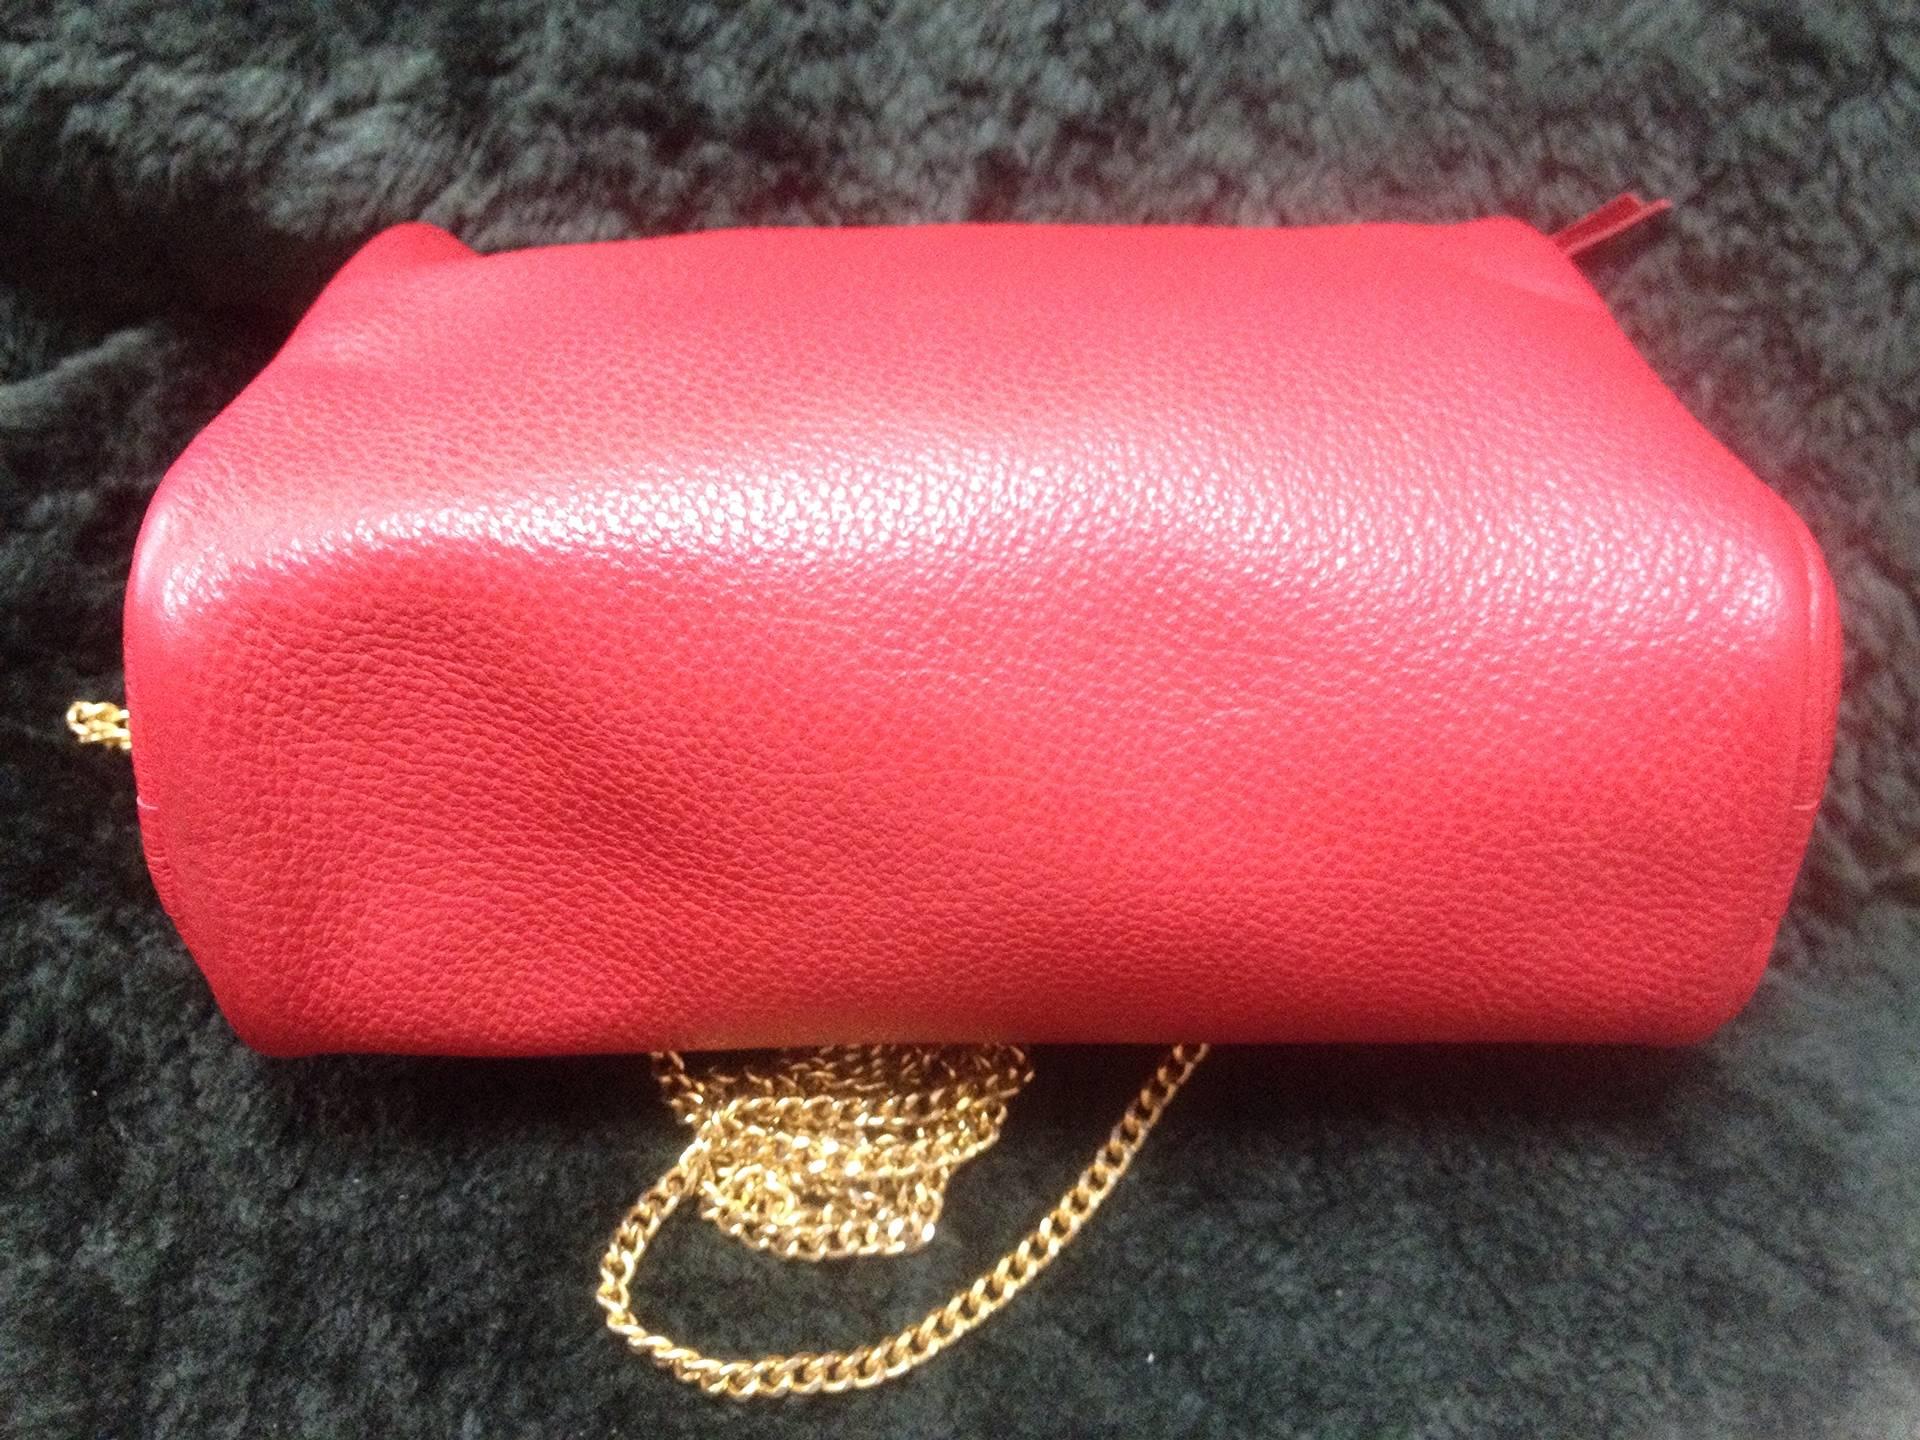 Vintage Nina Ricci red leather mini pouch purse with golden chain shoulder strap 1